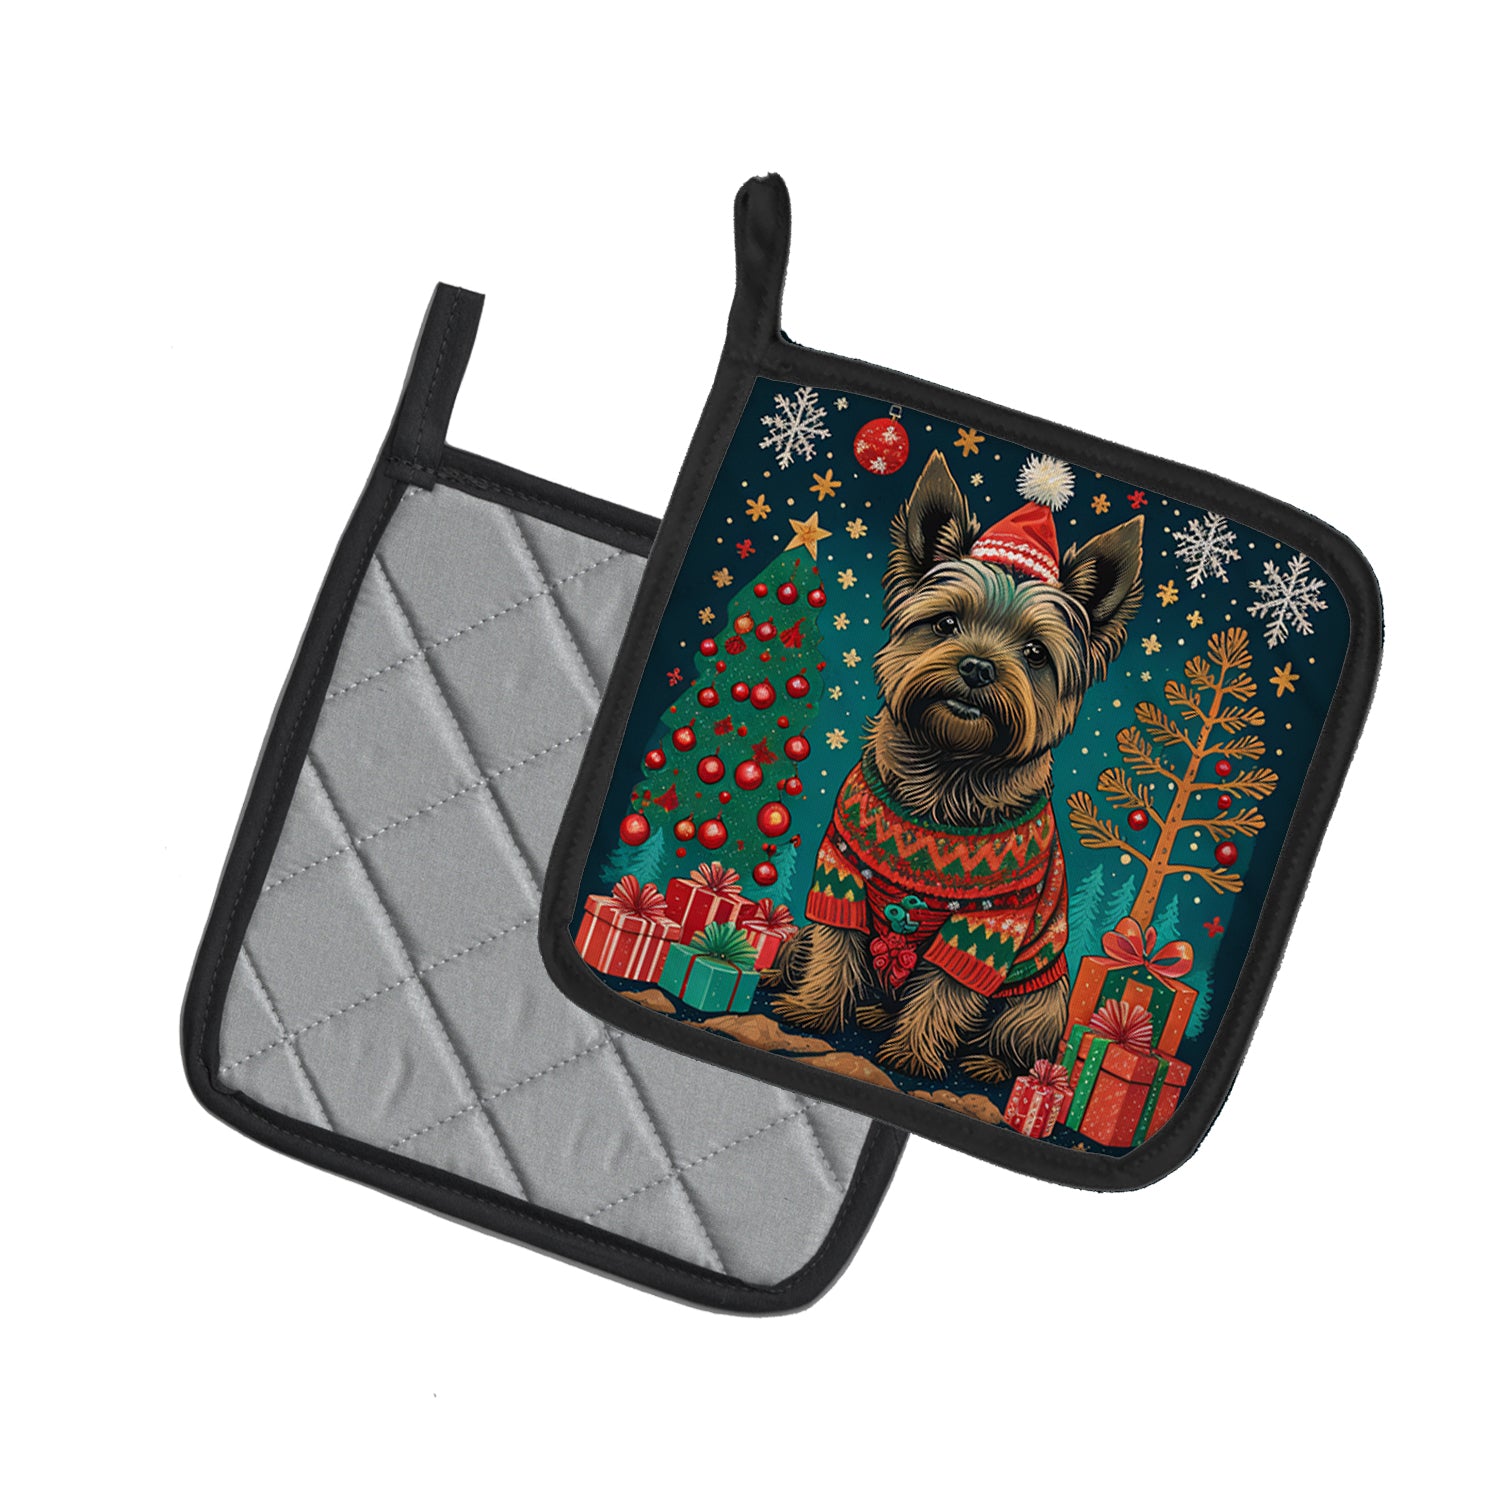 Buy this Cairn Terrier Christmas Pair of Pot Holders